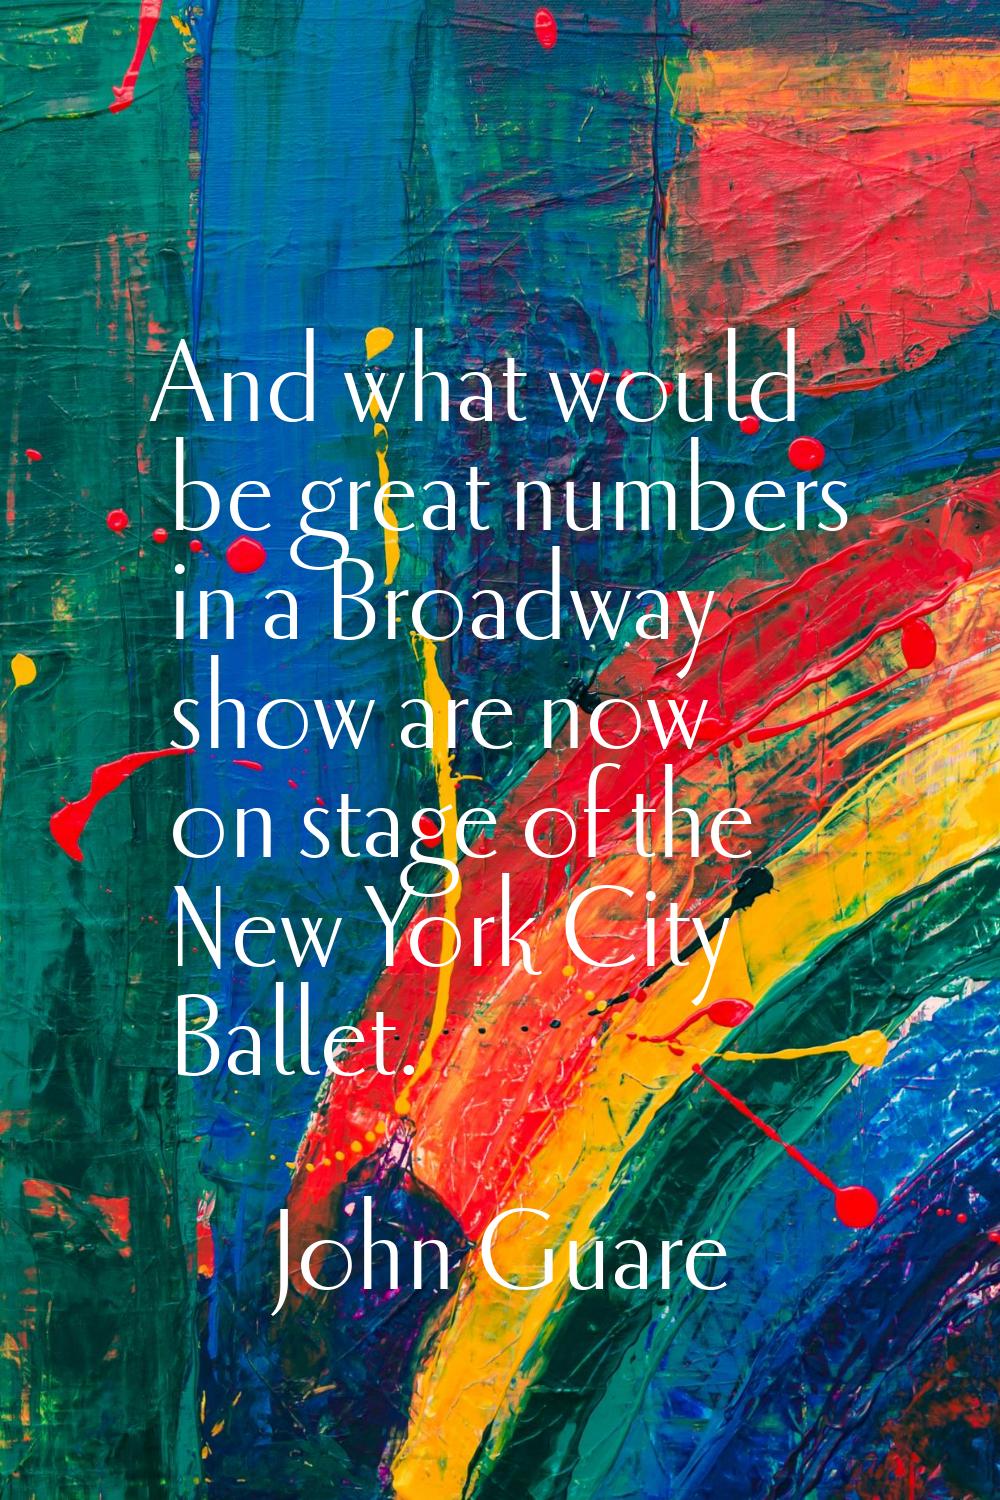 And what would be great numbers in a Broadway show are now on stage of the New York City Ballet.